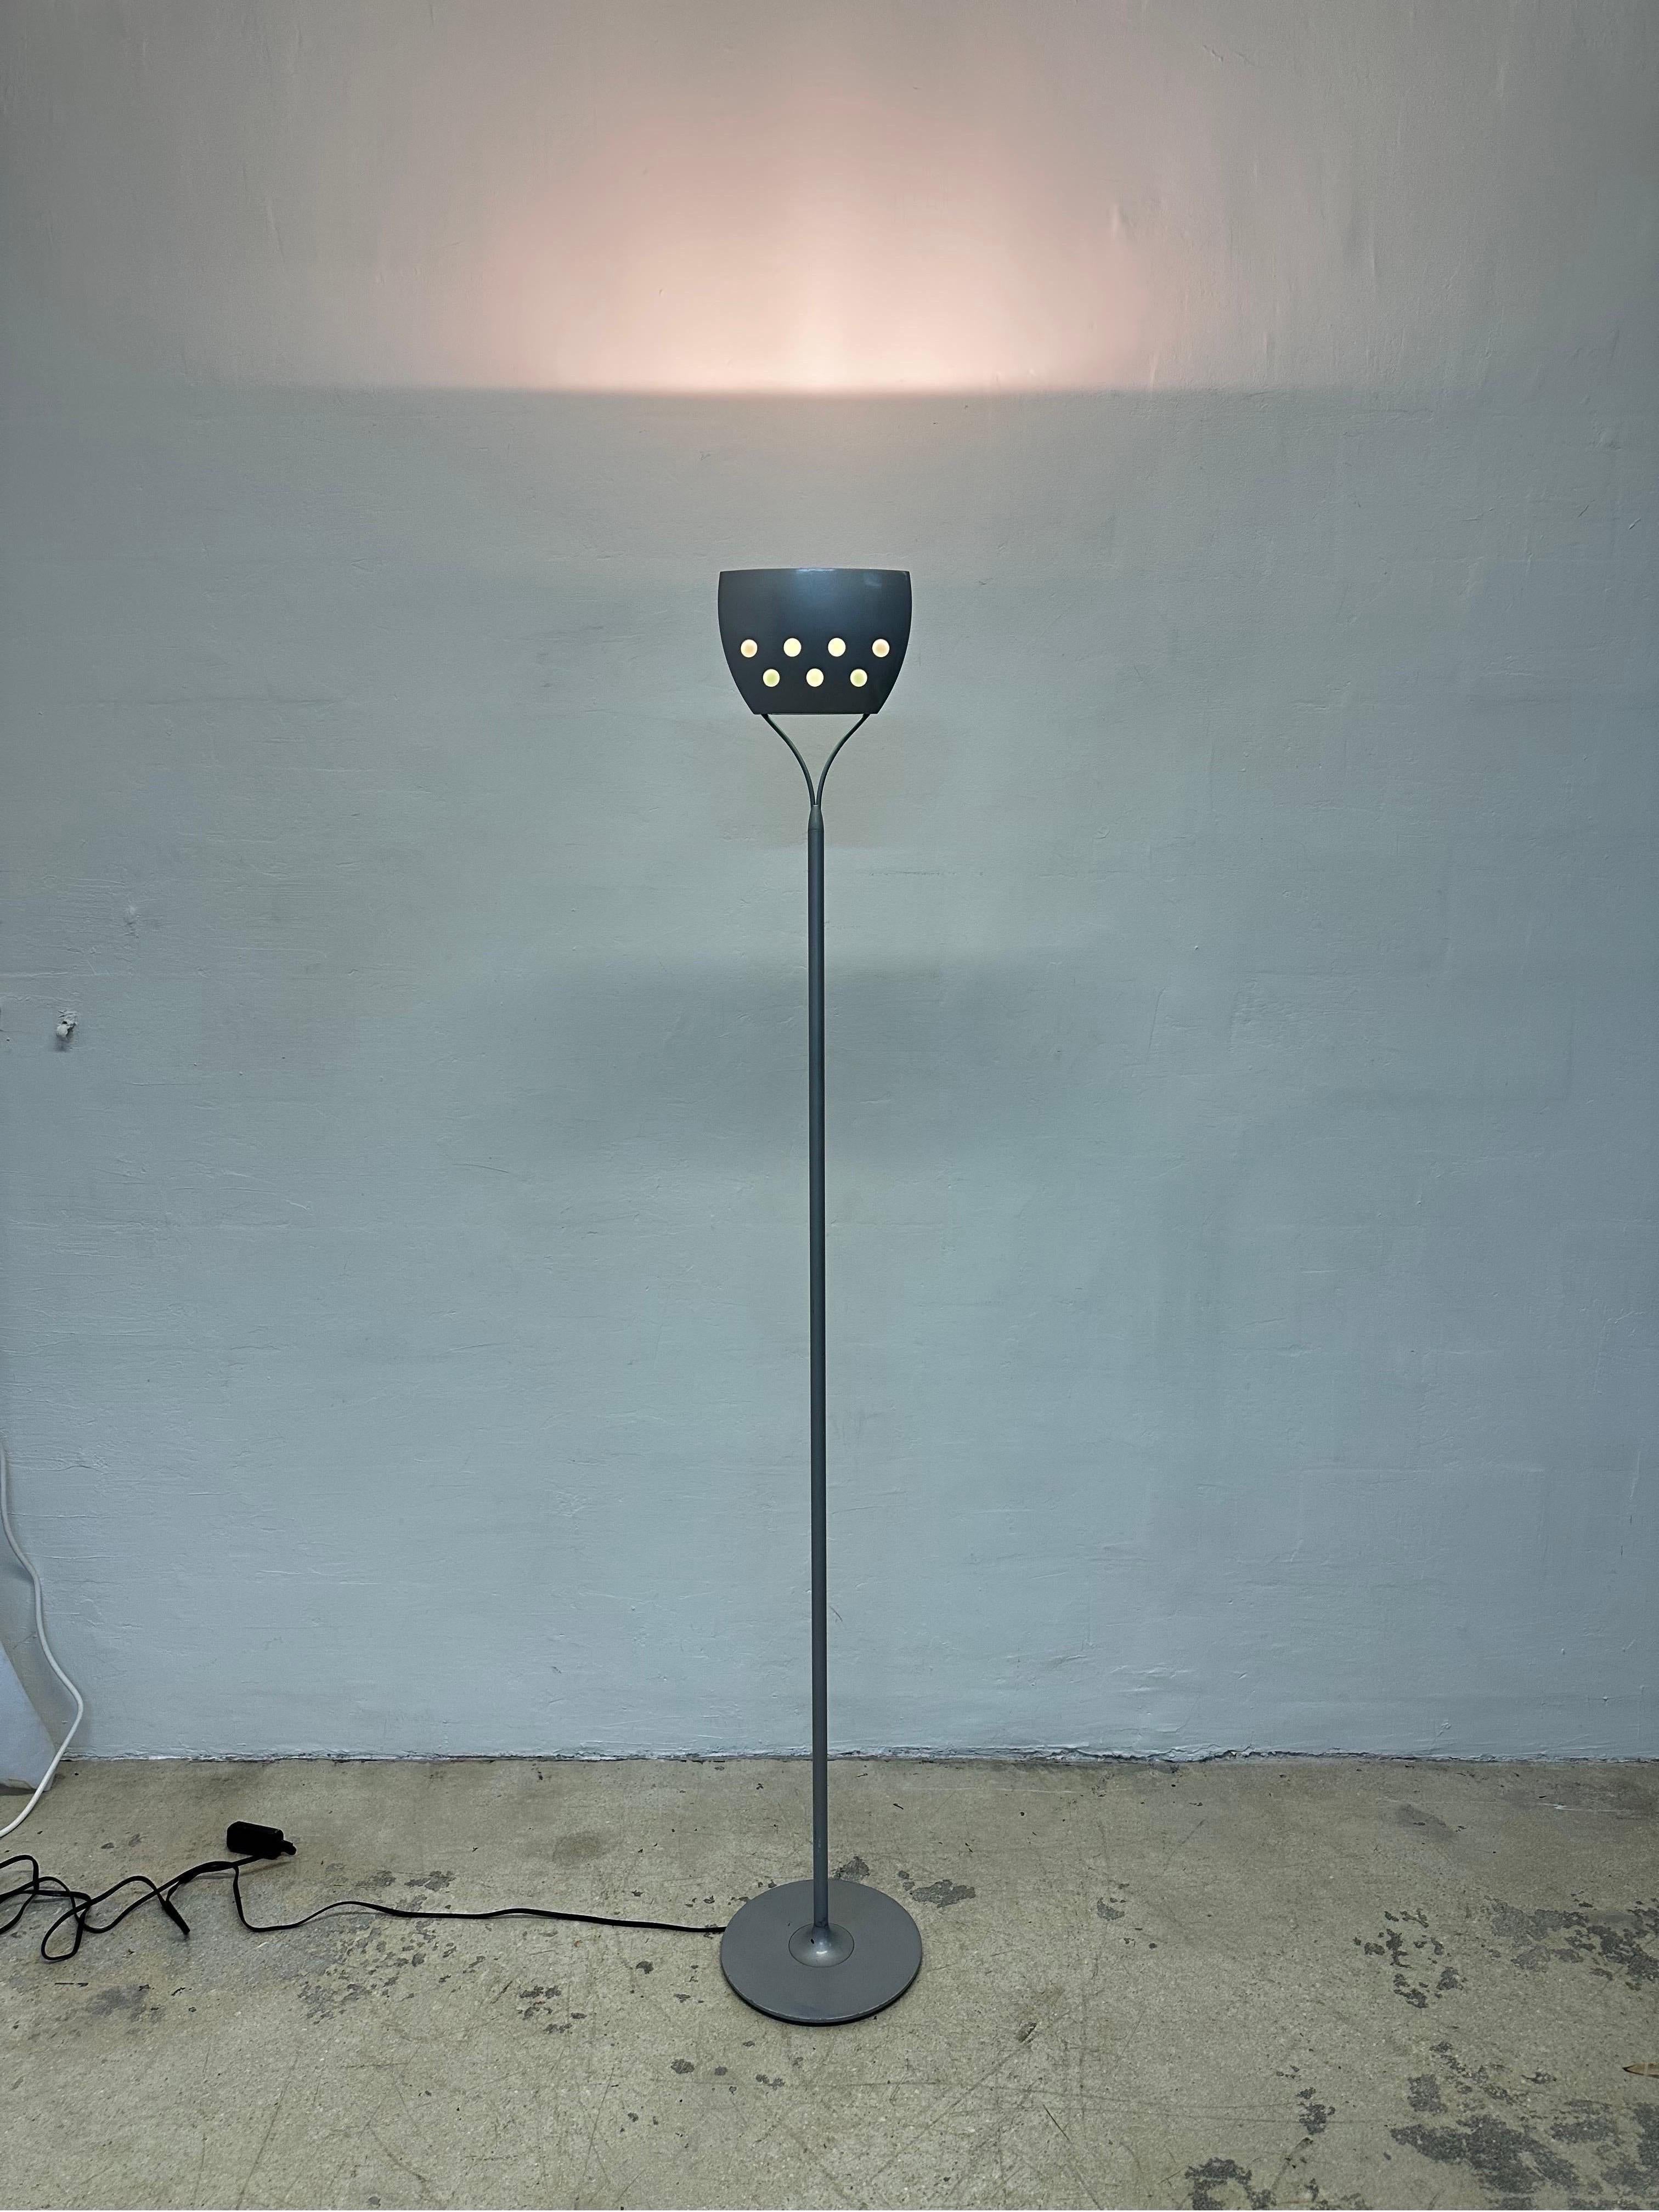 Modern halogen torchiere floor lamp by Perry King and Santiago Miranda for Sirrah Lighting, Italy.  

The halogen lamp bulb can easily be replaced with a more energy efficient and cooler LED bulb.